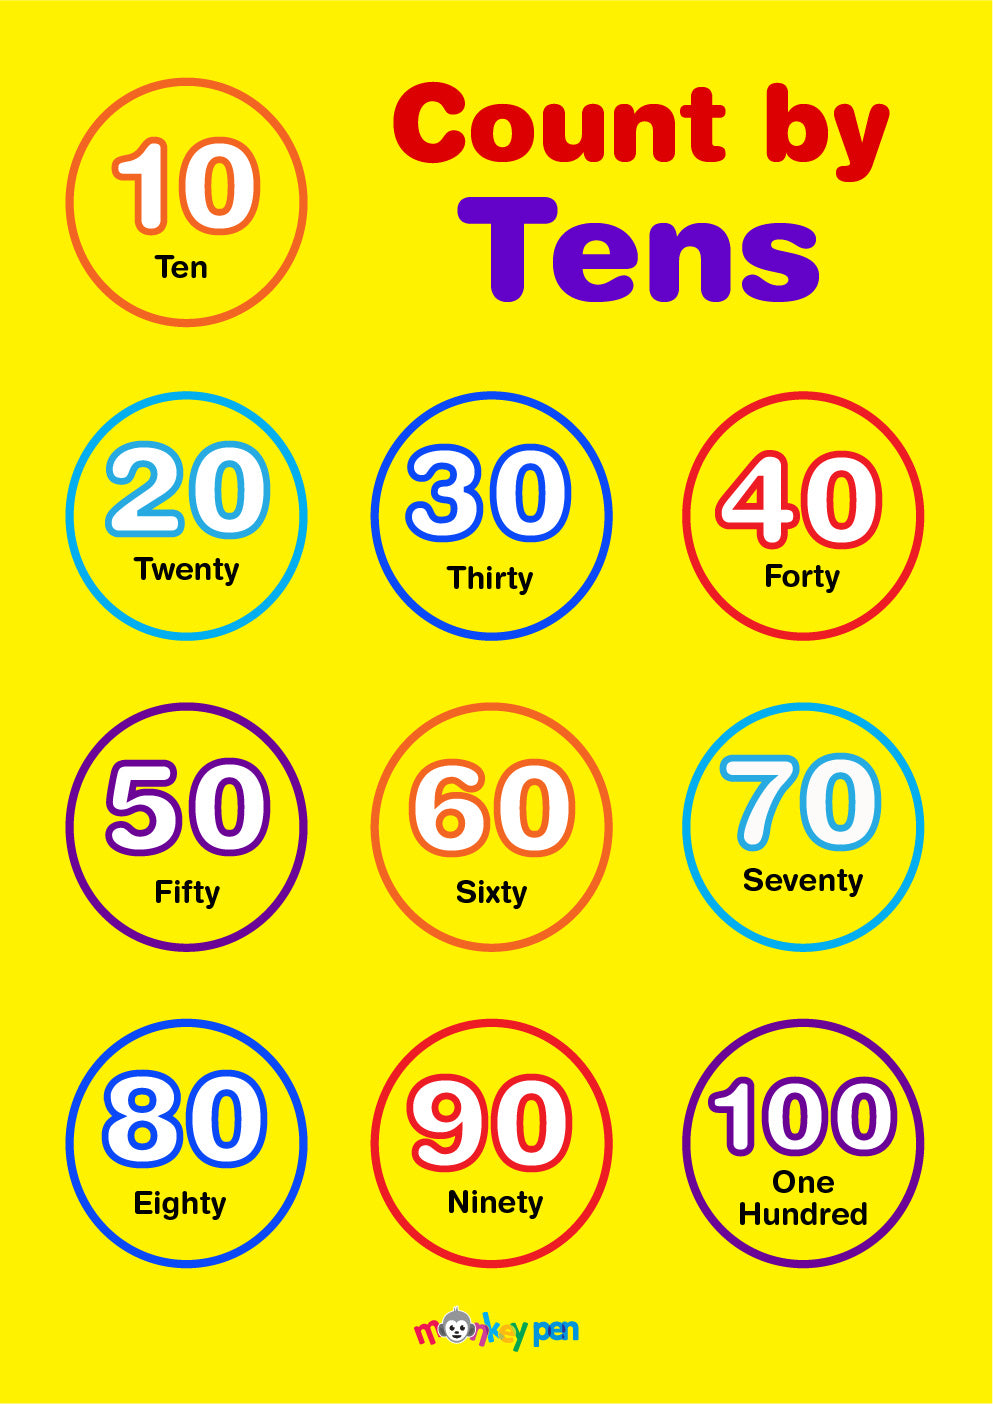 Count by 10s Poster for Kids